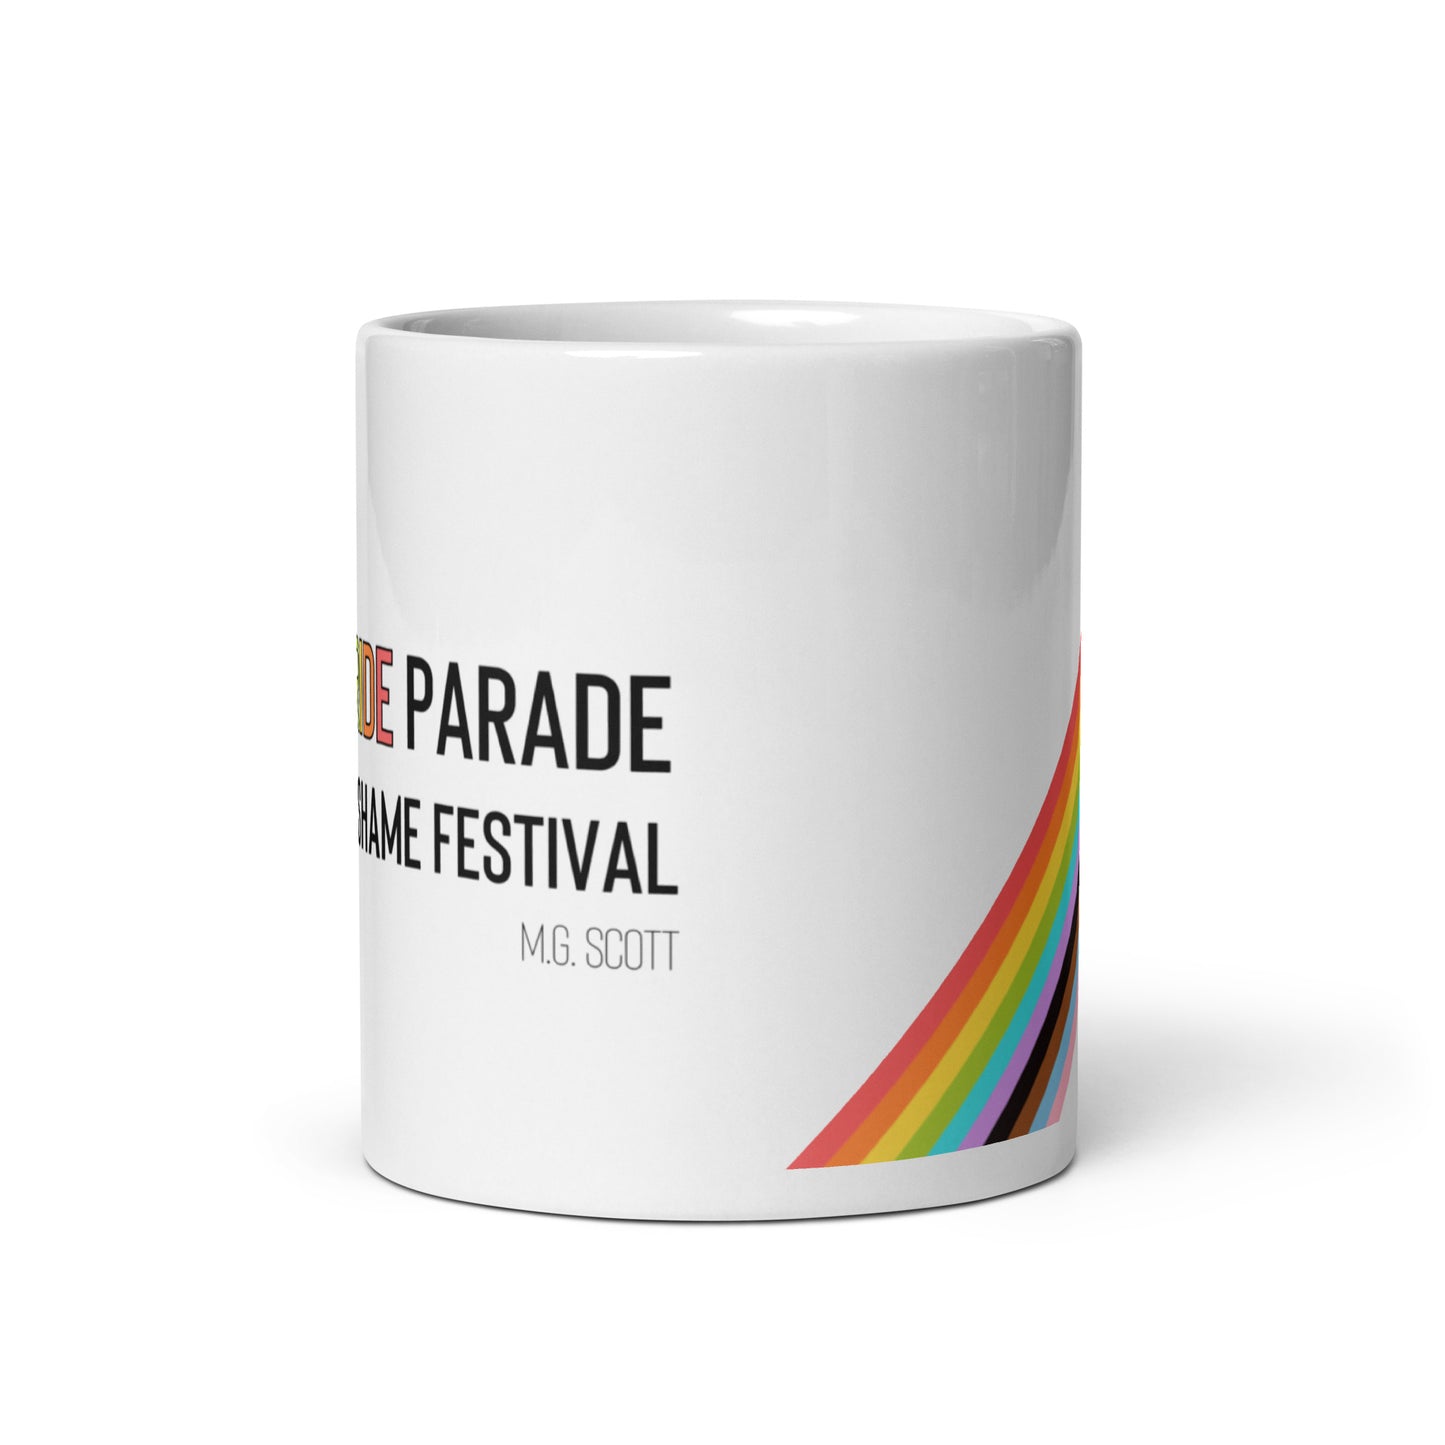 Gay Pride Parade Mug Inspired From The Office